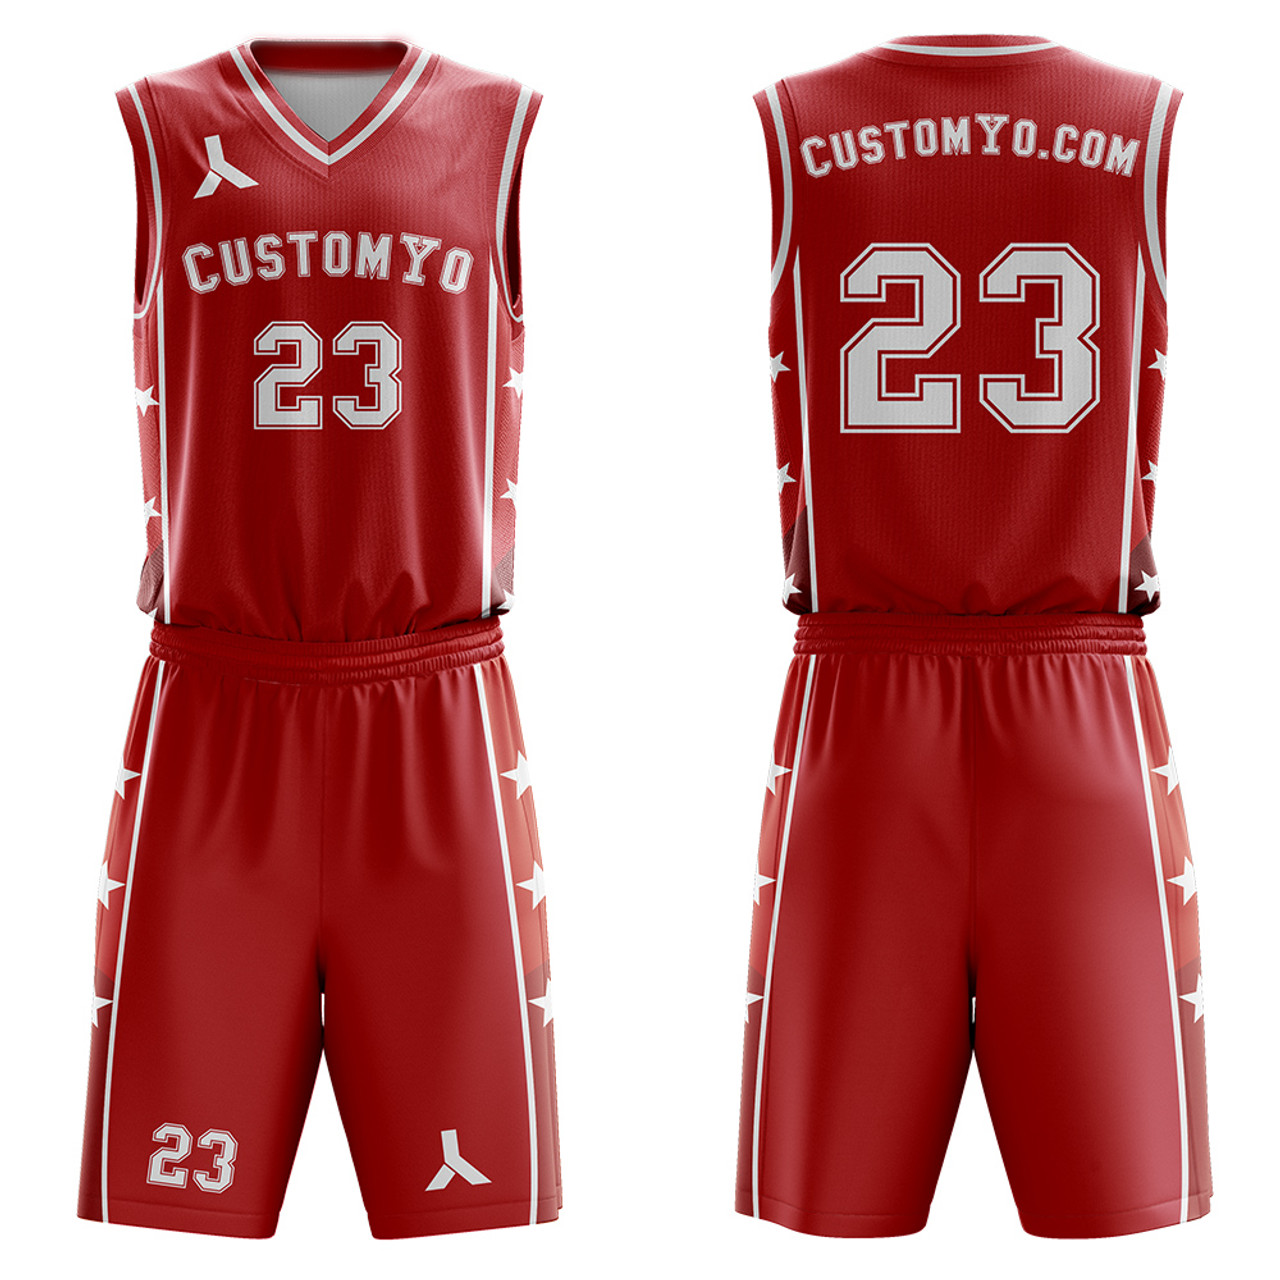 NEW Candace High School Basketball Jersey - Naperville | Throwback Custom  Retro Sports Fan Apparel Jersey